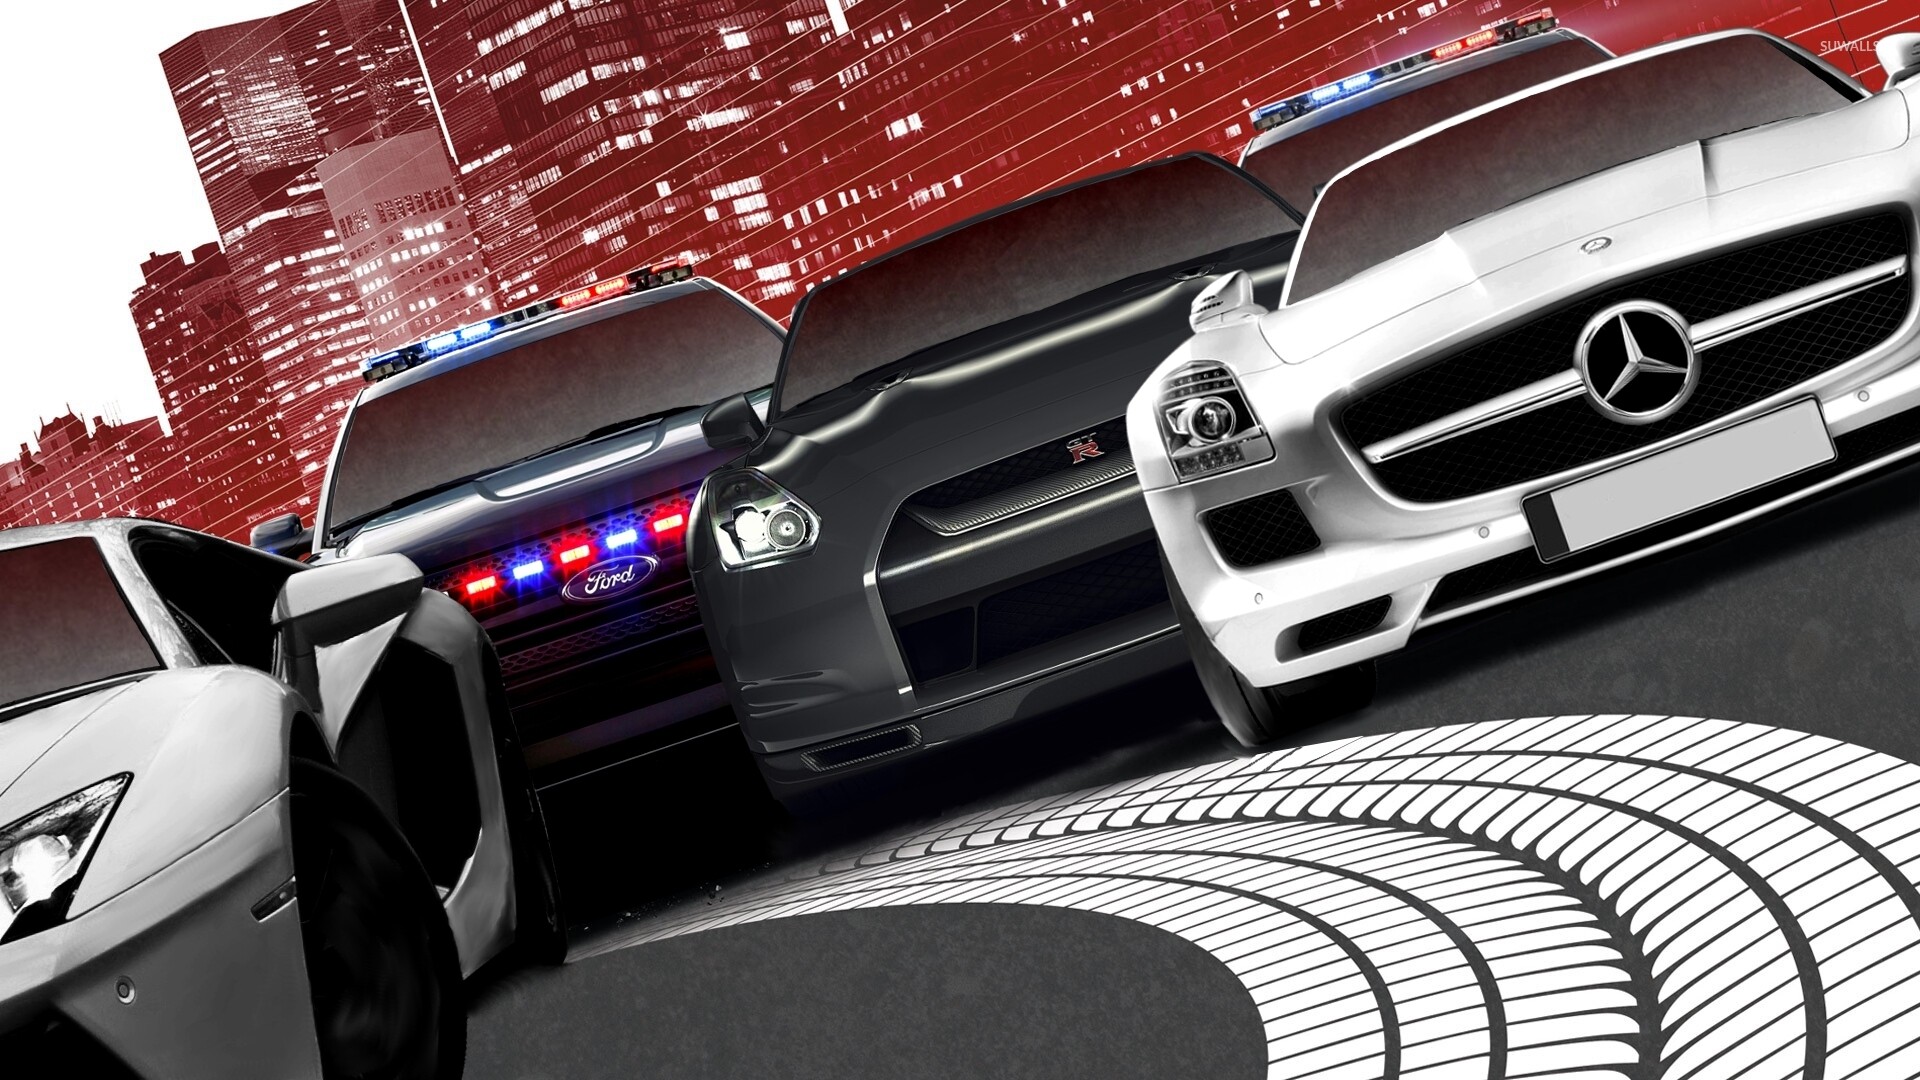 Need for Speed: Most Wanted, An open world racing game developed by Criterion Games. 1920x1080 Full HD Wallpaper.